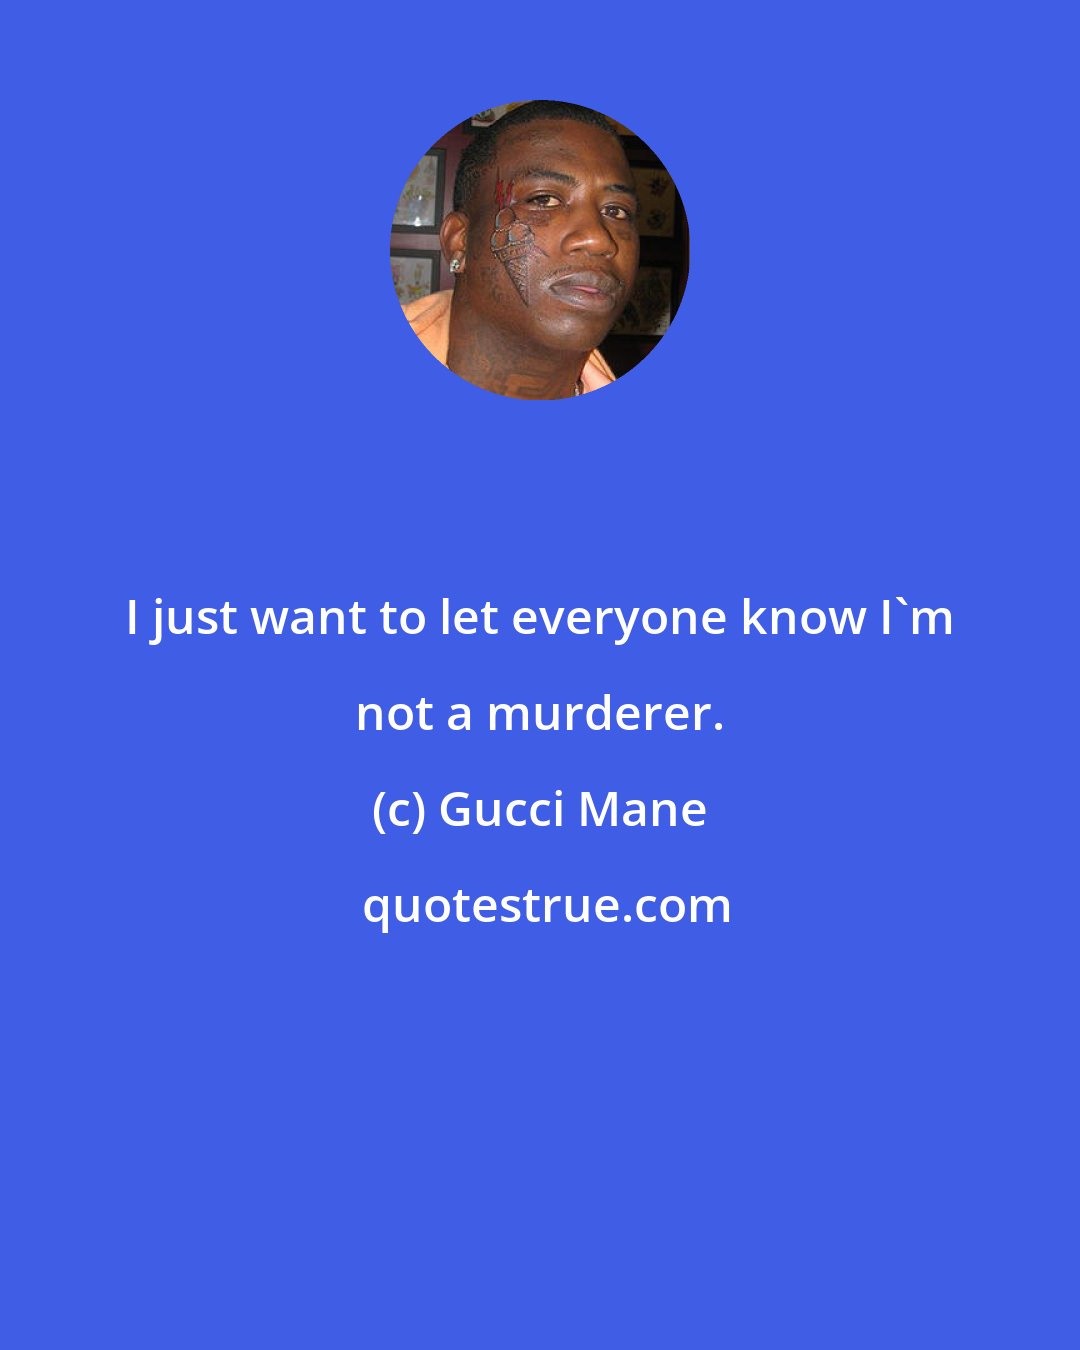 Gucci Mane: I just want to let everyone know I'm not a murderer.